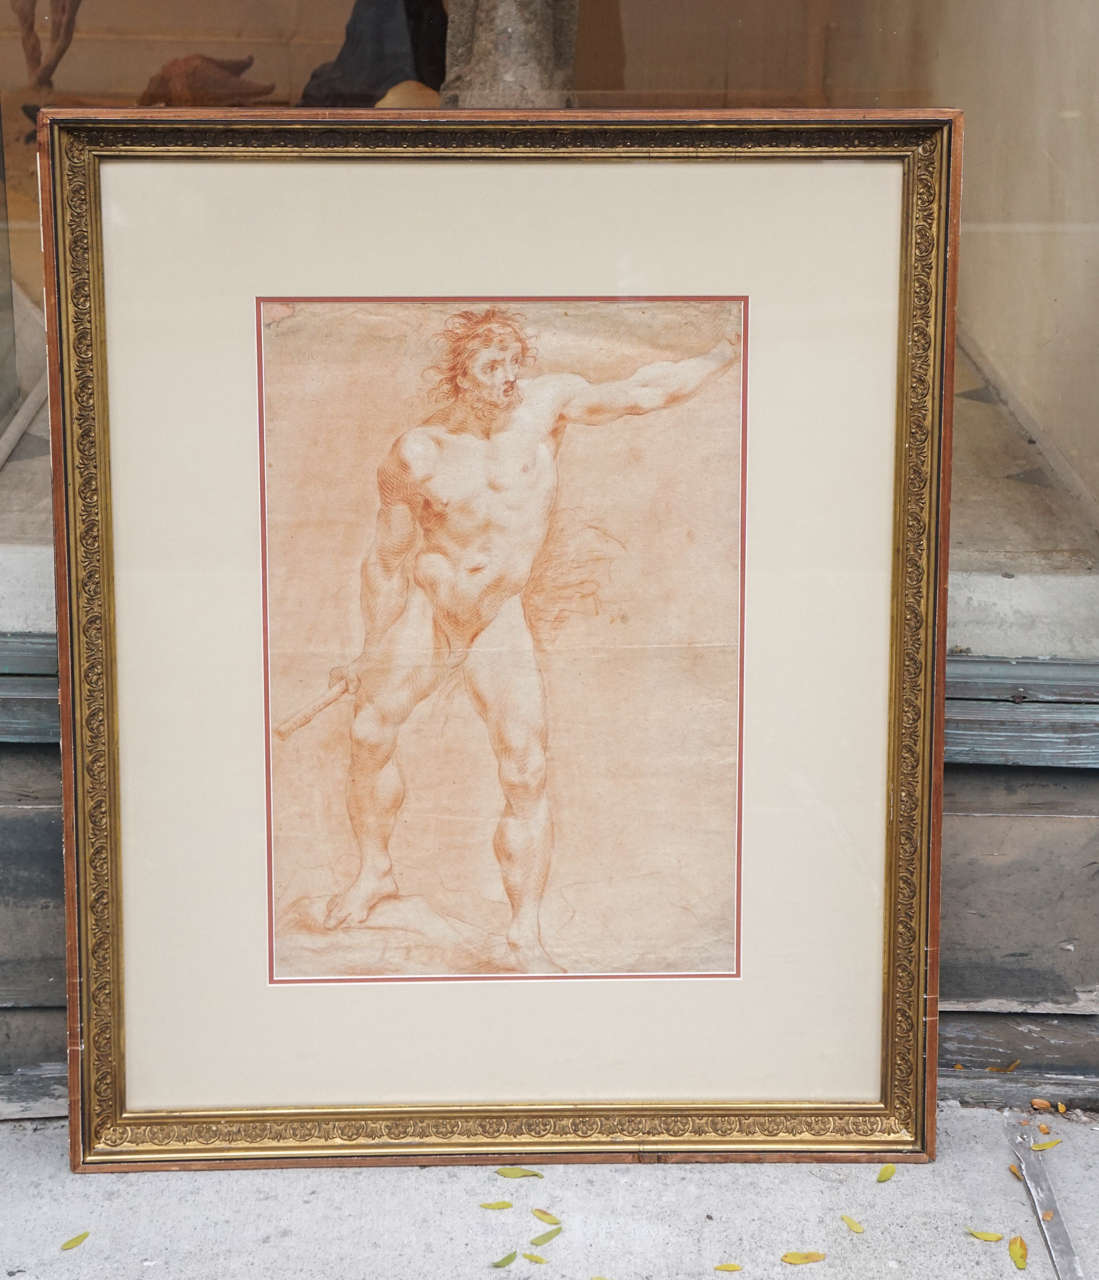 This lovely drawing or figure study in pencil and sanguine on paper is by Gaetano Gandolfi (1734-1804) This Italian painter of the late Baroque and early Neoclassical period was active most notable in Bologna .Born in San Matteo della Decima near